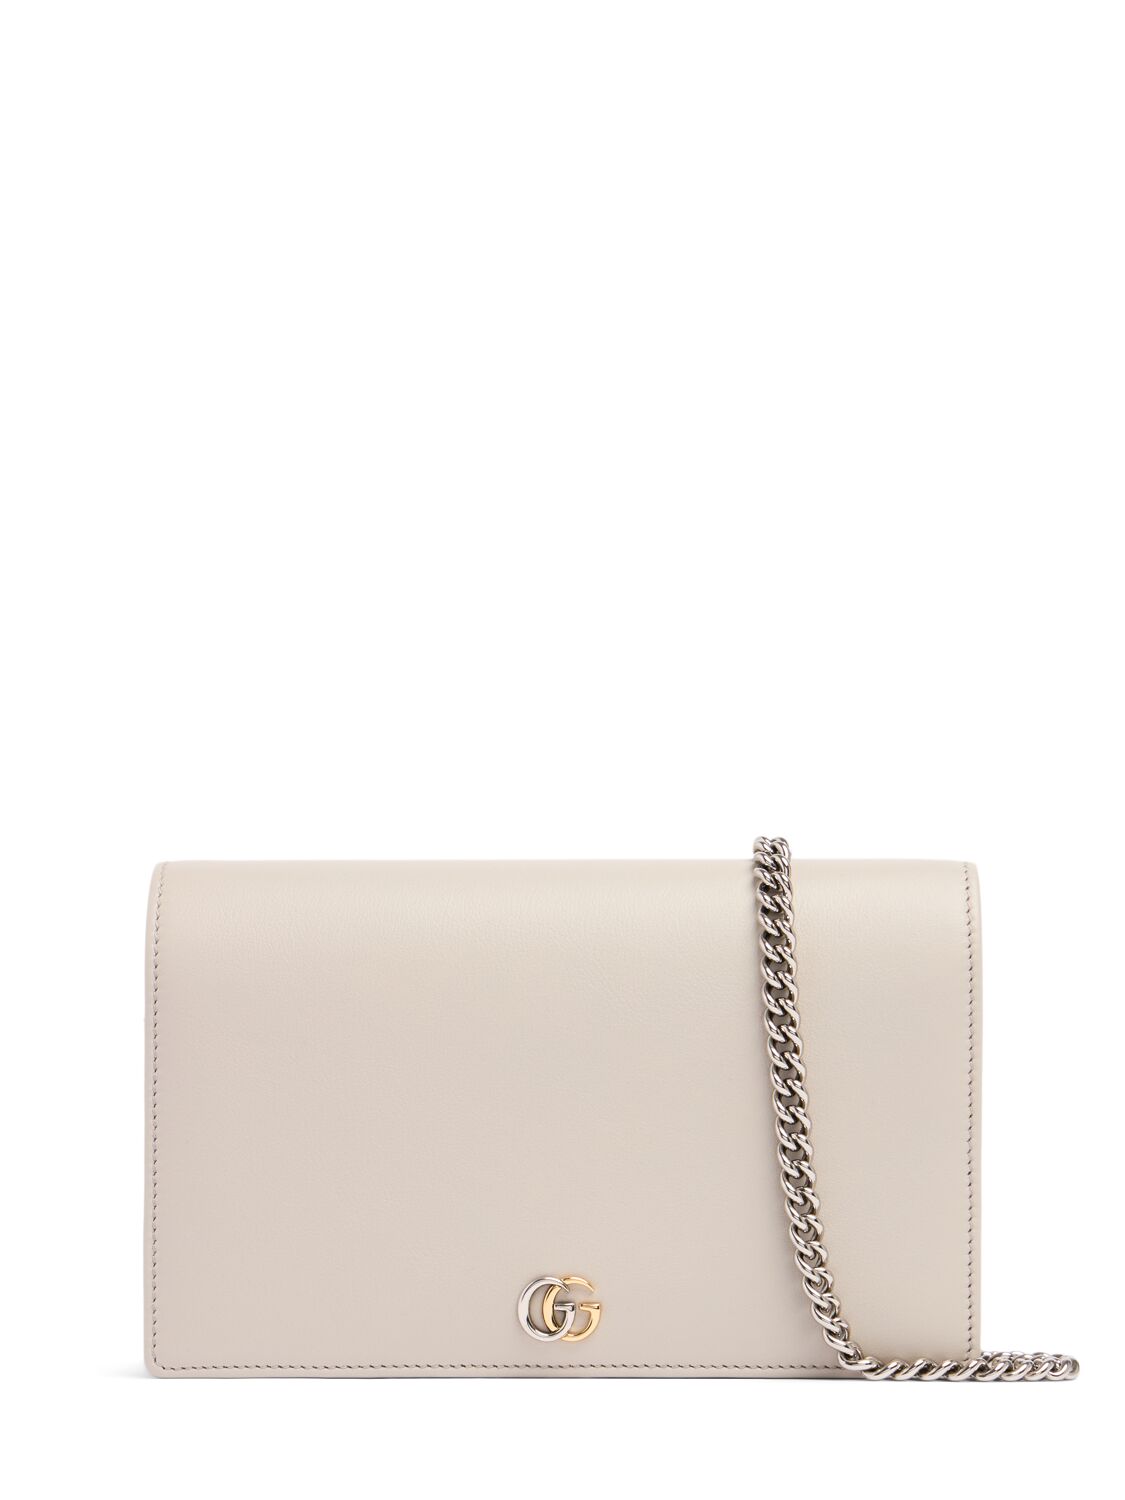 Gucci Petite Marmont Leather Chain Wallet In Sphinx